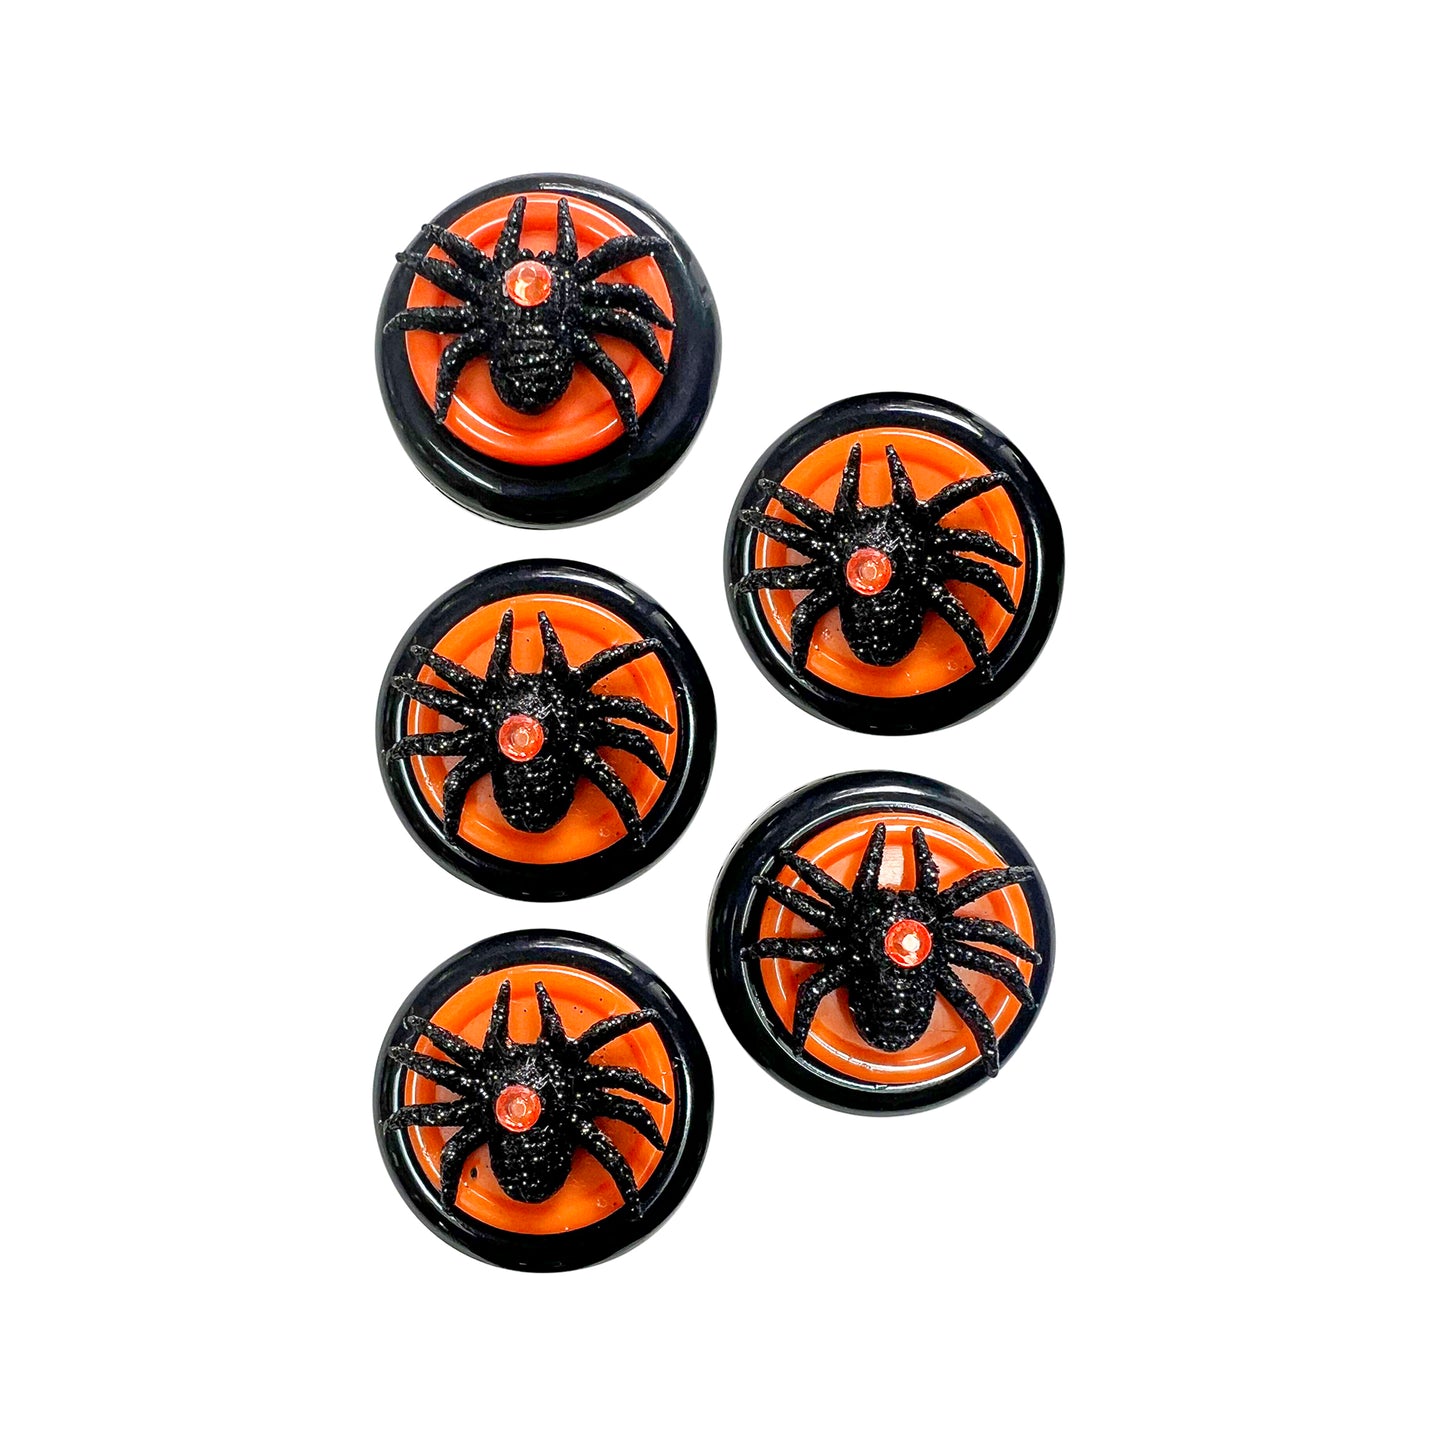 Glass Wrappings set of 5 sparkly black spiders sitting atop 1" black and orange buttons. All are adorned with orange gems.  